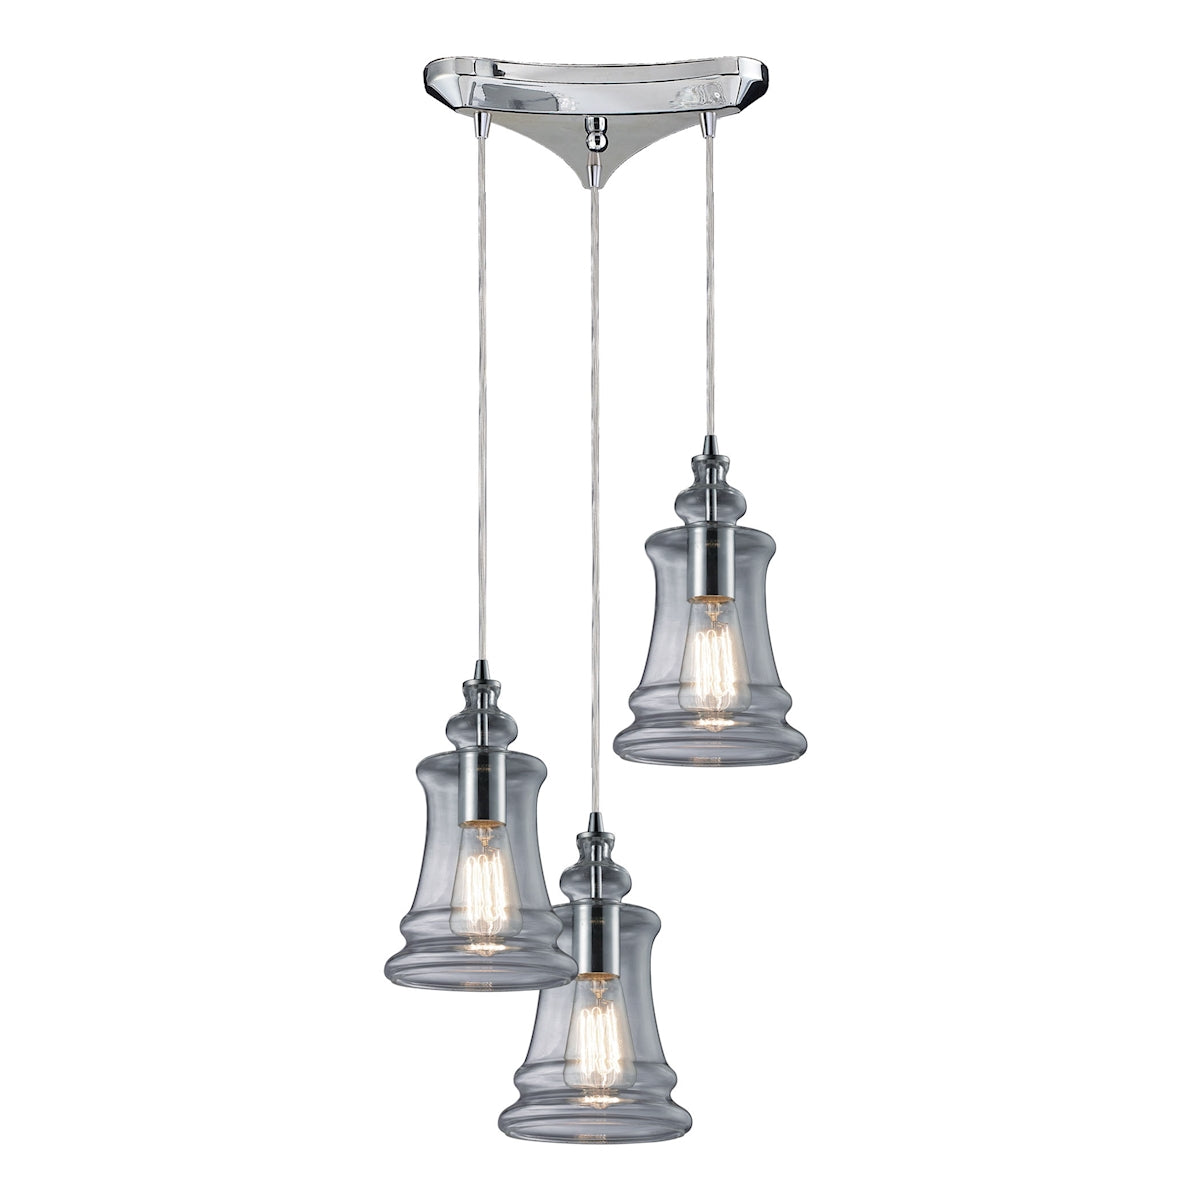 ELK Lighting 60052-3 Menlow Park 3-Light Triangular Pendant Fixture in Polished Chrome with Smoked Glass